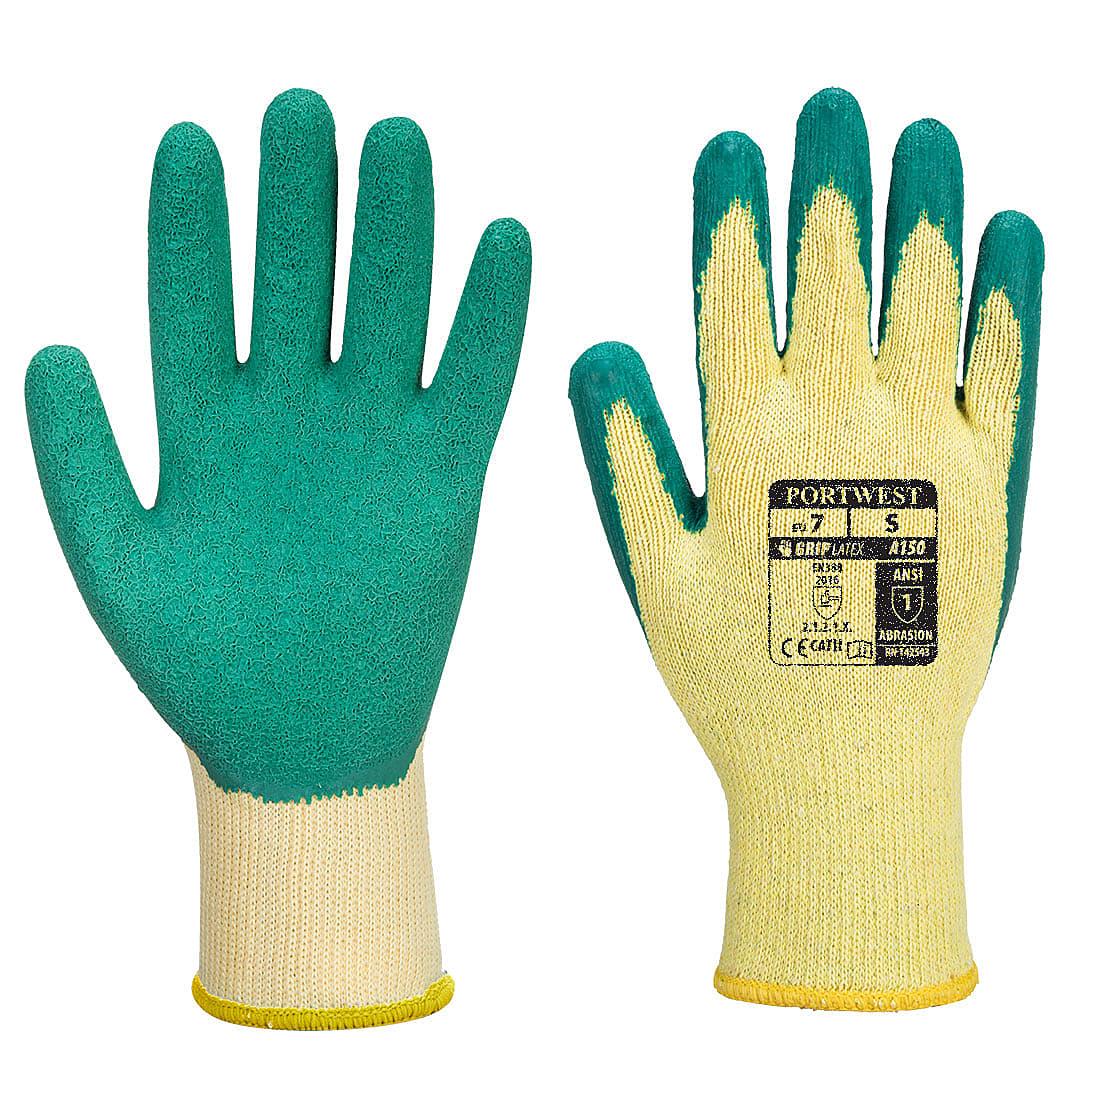 Portwest Classic Grip Gloves - Latex in Green (Product Code: A150)